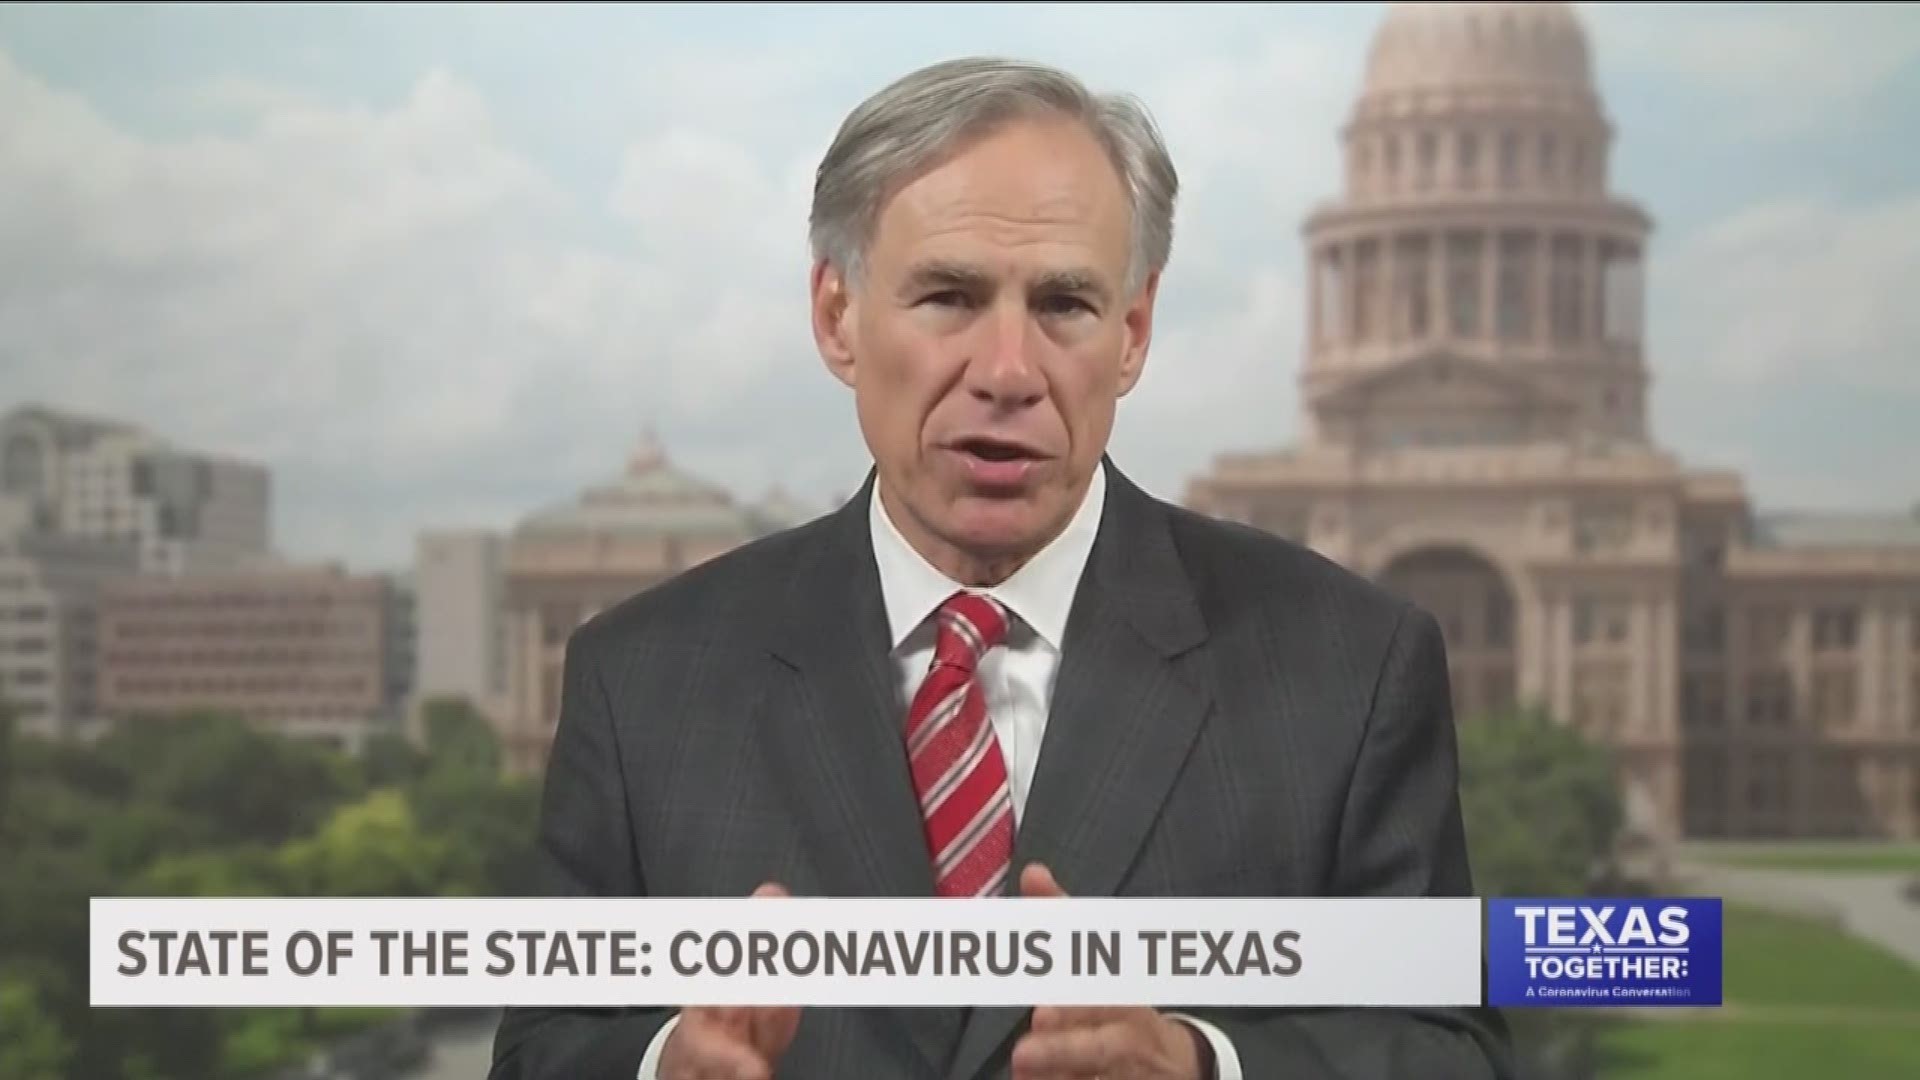 Governor Greg Abbott spoke about his recent executive order and said additional health care resources are coming to help combat the spread of COVID-19.